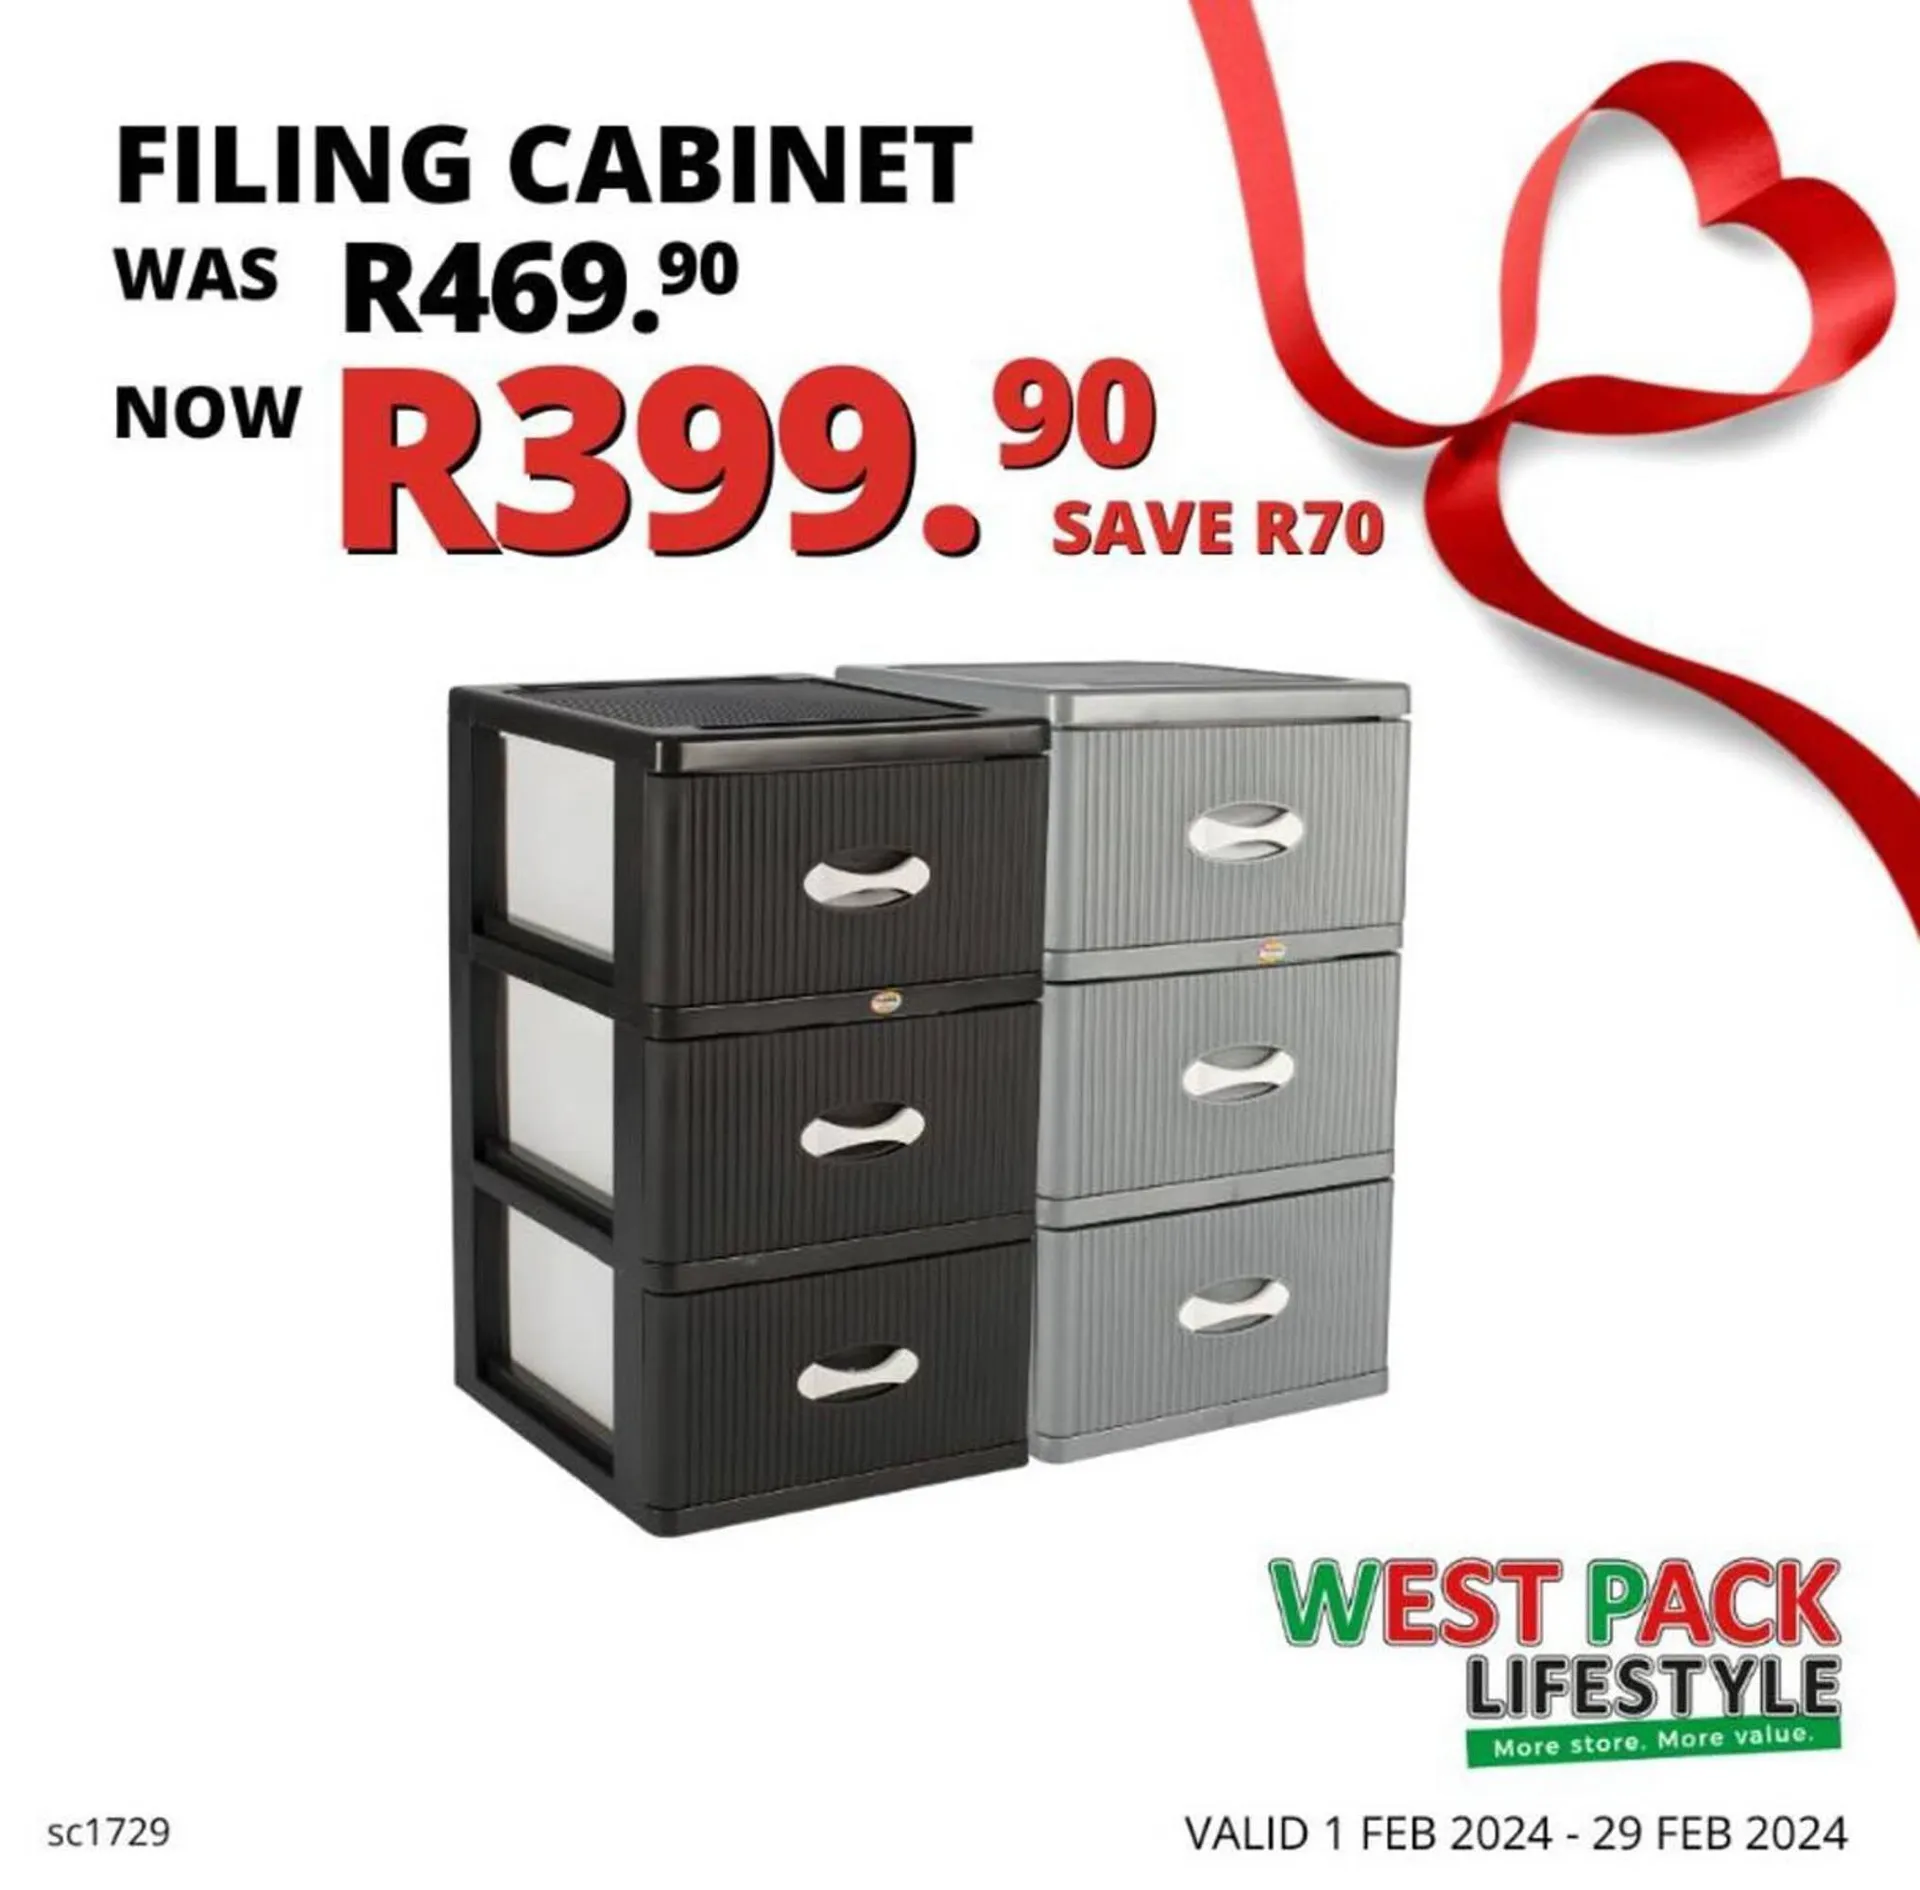 West Pack Lifestyle catalogue - 21 February 29 February 2024 - Page 5